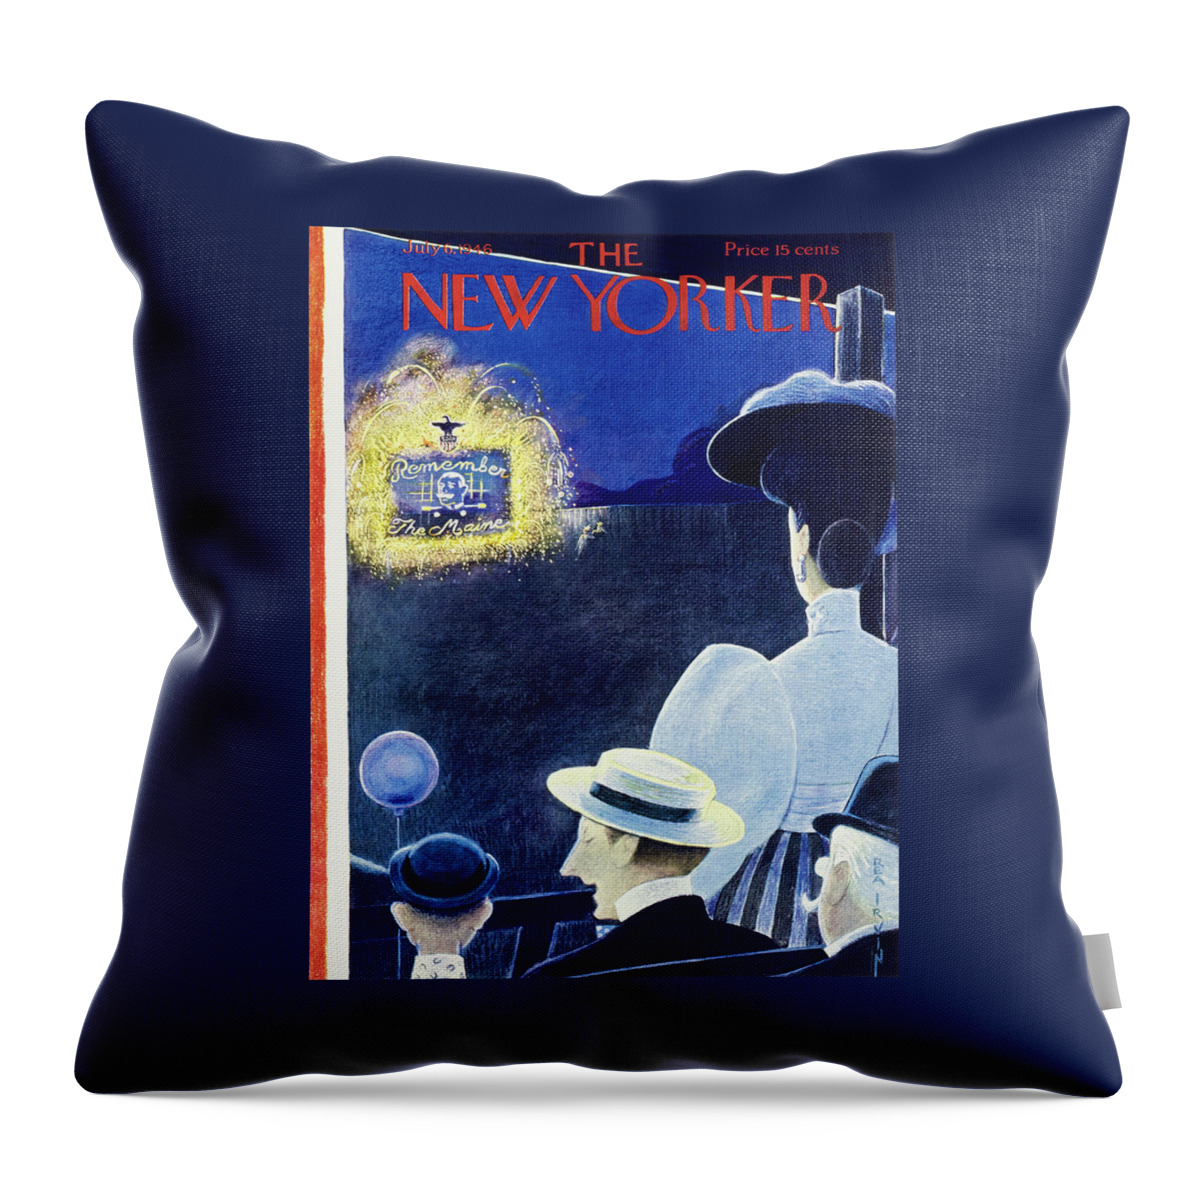 New Yorker July 6 1946 Throw Pillow